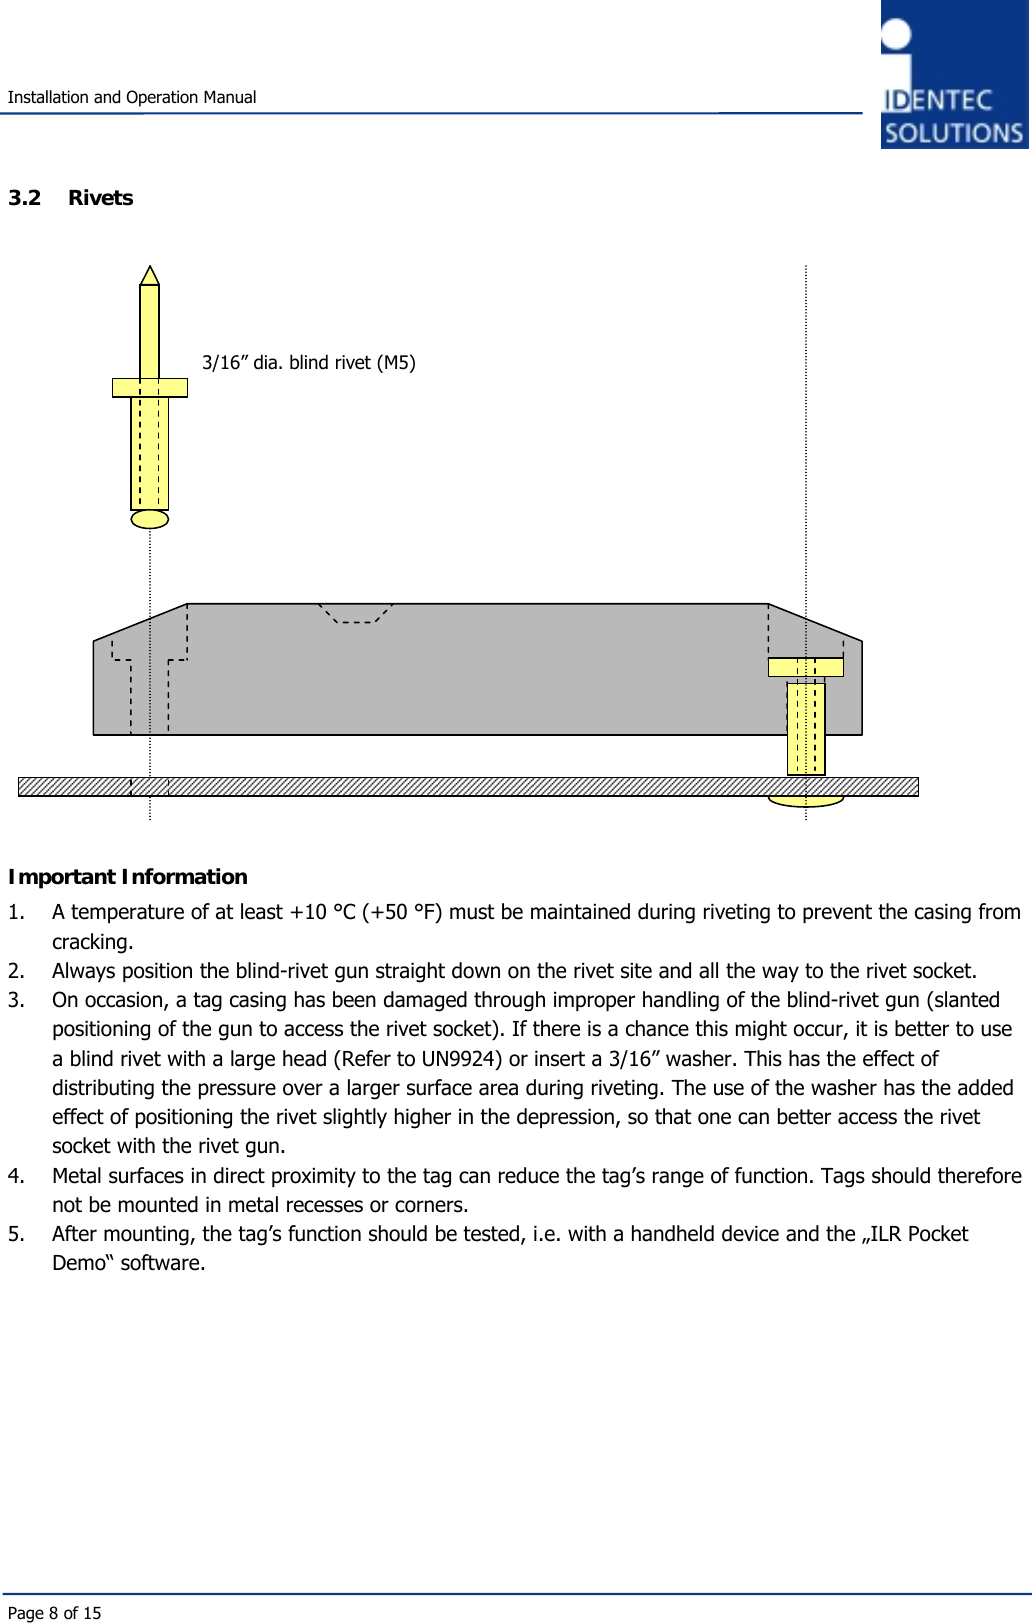   Installation and Operation Manual Page 8 of 15 3.2 Rivets                      Important Information 1.  A temperature of at least +10 °C (+50 °F) must be maintained during riveting to prevent the casing from cracking.  2.  Always position the blind-rivet gun straight down on the rivet site and all the way to the rivet socket.  3.  On occasion, a tag casing has been damaged through improper handling of the blind-rivet gun (slanted positioning of the gun to access the rivet socket). If there is a chance this might occur, it is better to use a blind rivet with a large head (Refer to UN9924) or insert a 3/16” washer. This has the effect of distributing the pressure over a larger surface area during riveting. The use of the washer has the added effect of positioning the rivet slightly higher in the depression, so that one can better access the rivet socket with the rivet gun.  4.  Metal surfaces in direct proximity to the tag can reduce the tag’s range of function. Tags should therefore not be mounted in metal recesses or corners.  5.  After mounting, the tag’s function should be tested, i.e. with a handheld device and the „ILR Pocket Demo“ software.          3/16” dia. blind rivet (M5) 